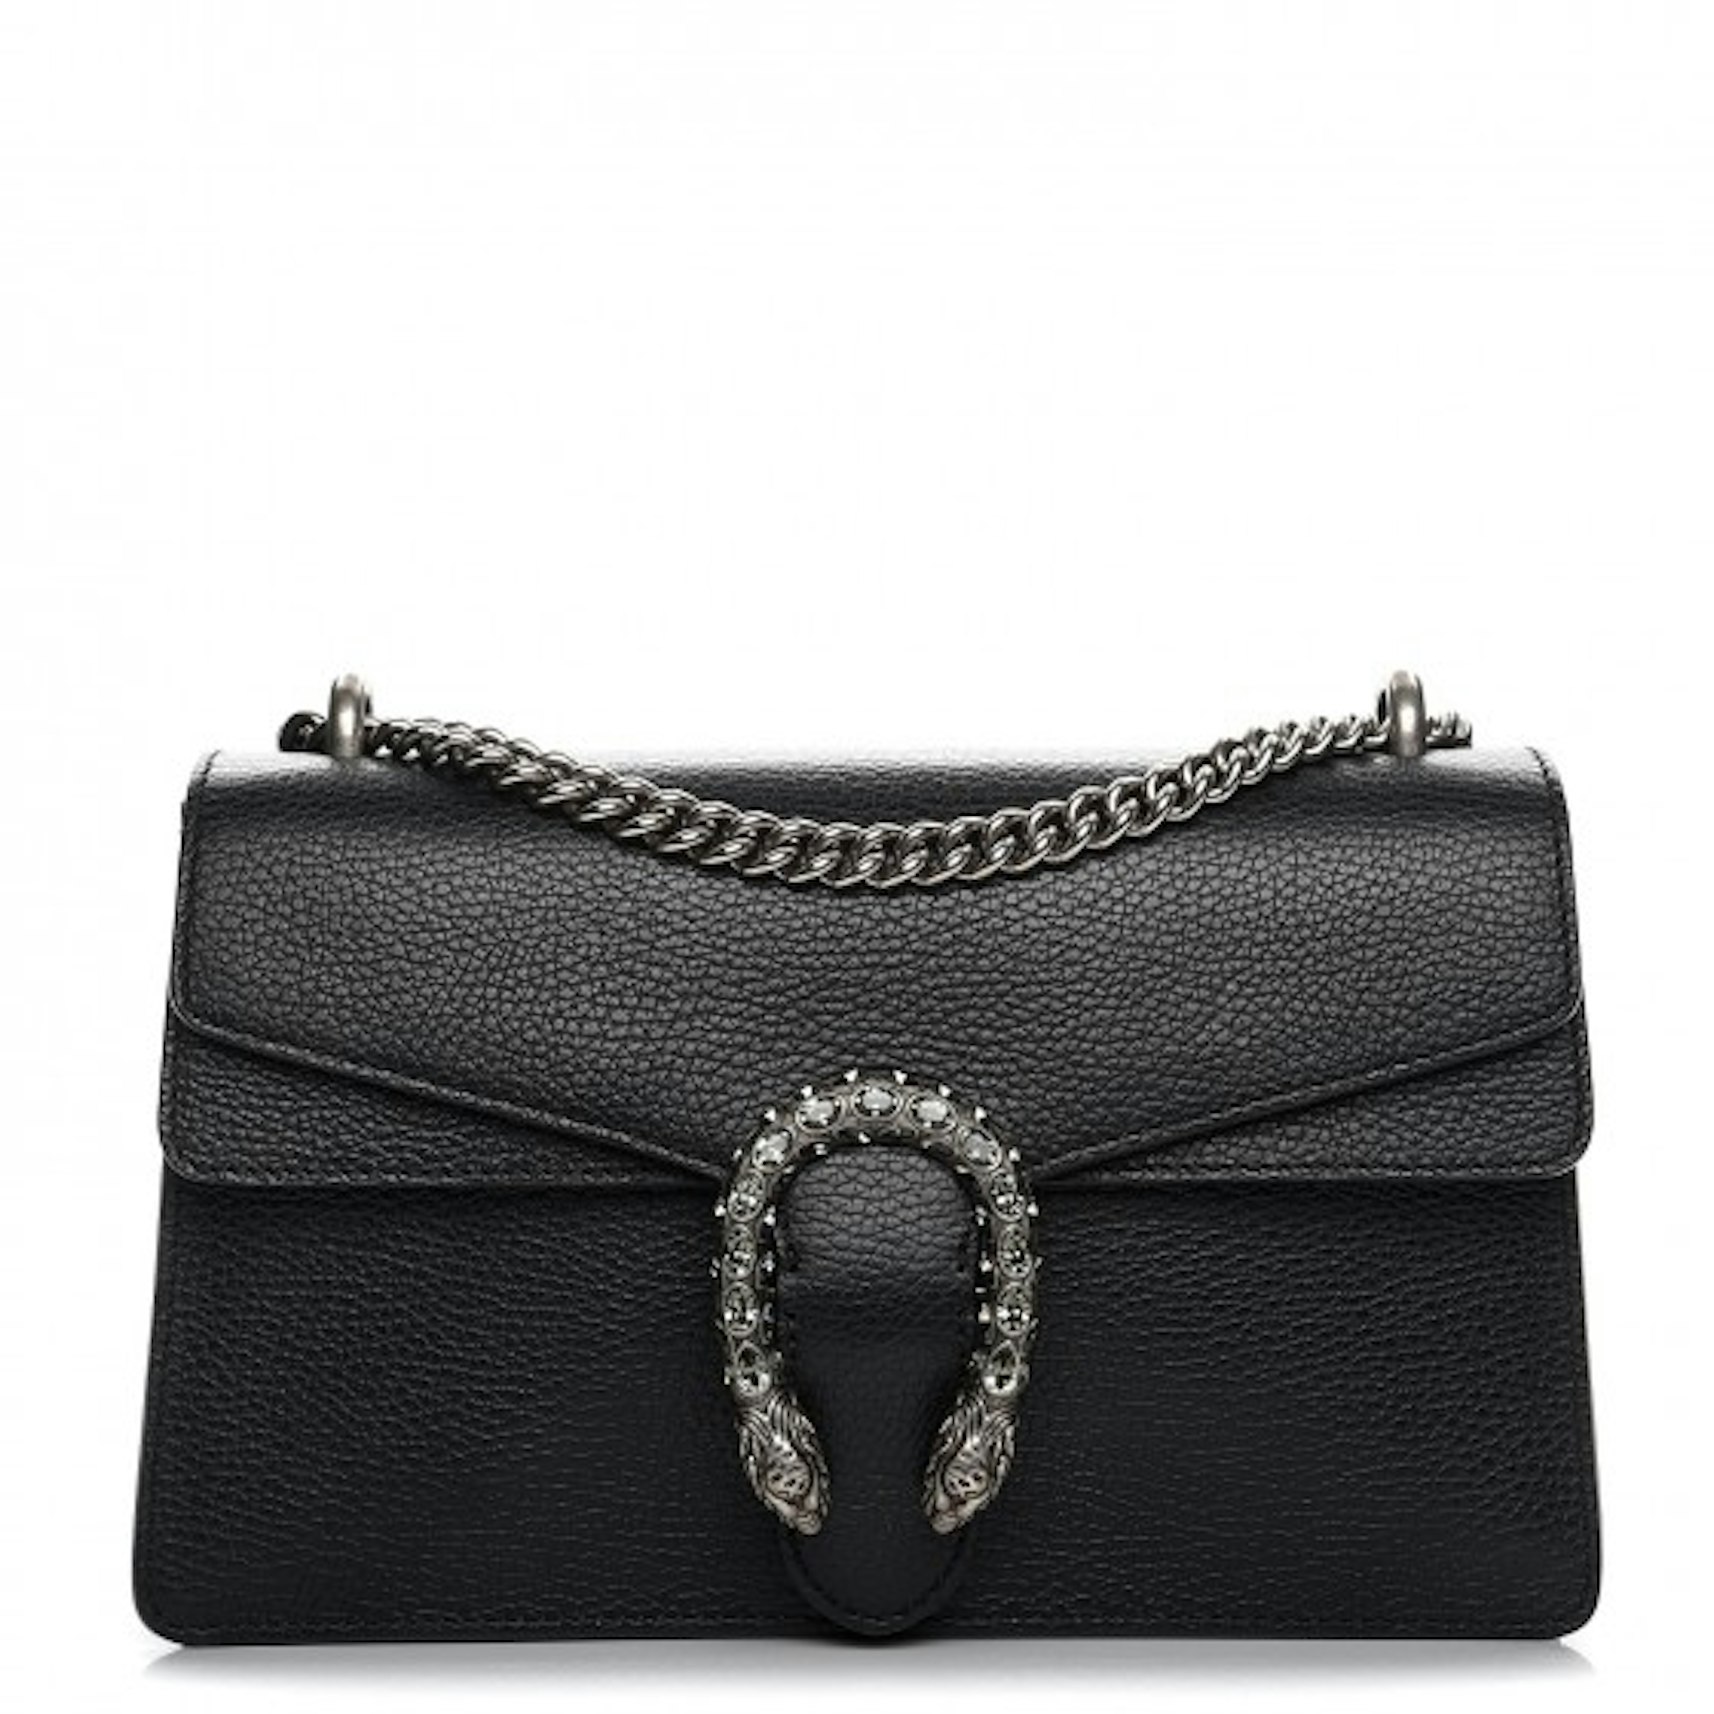 Gucci Bag Pebbled Calfskin Small Black in Pebbled Calfskin Leather with Silver-tone - US